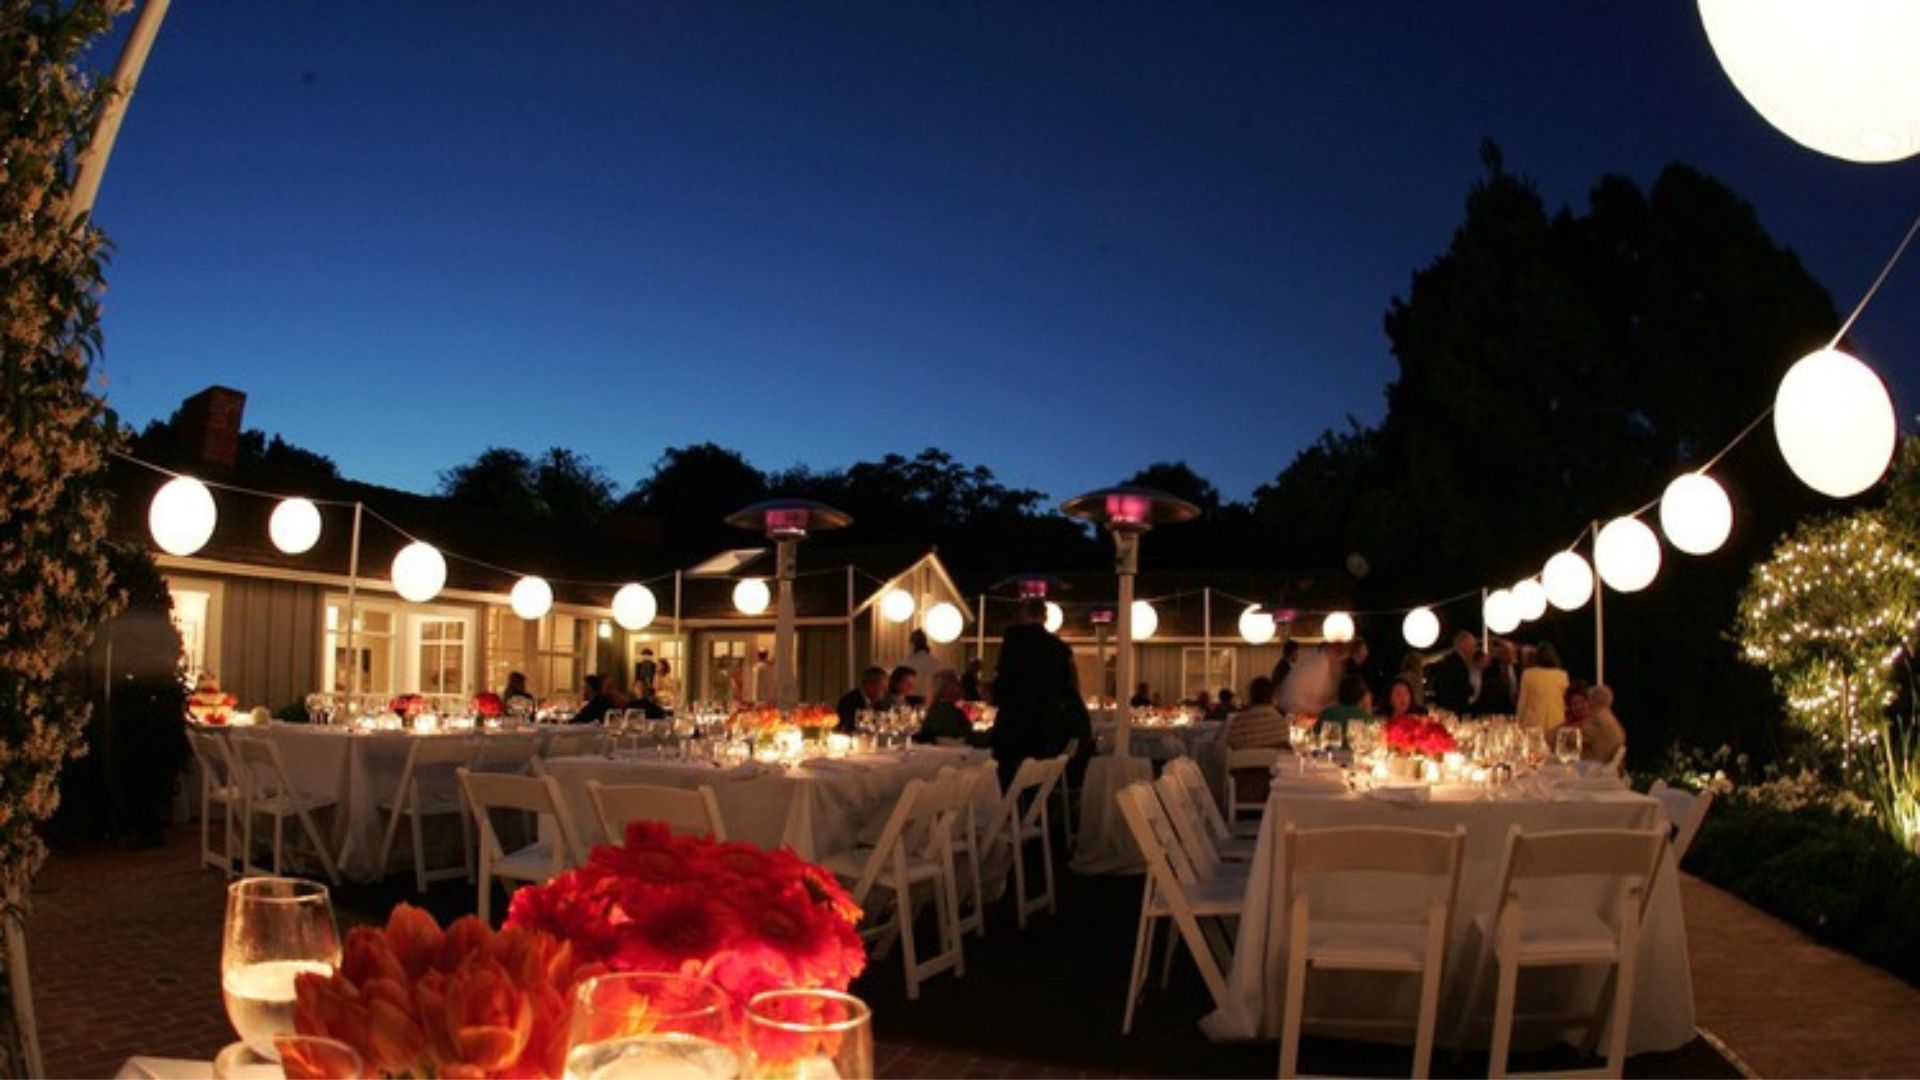 a party decoration with light, tables and chairs showing party planning 